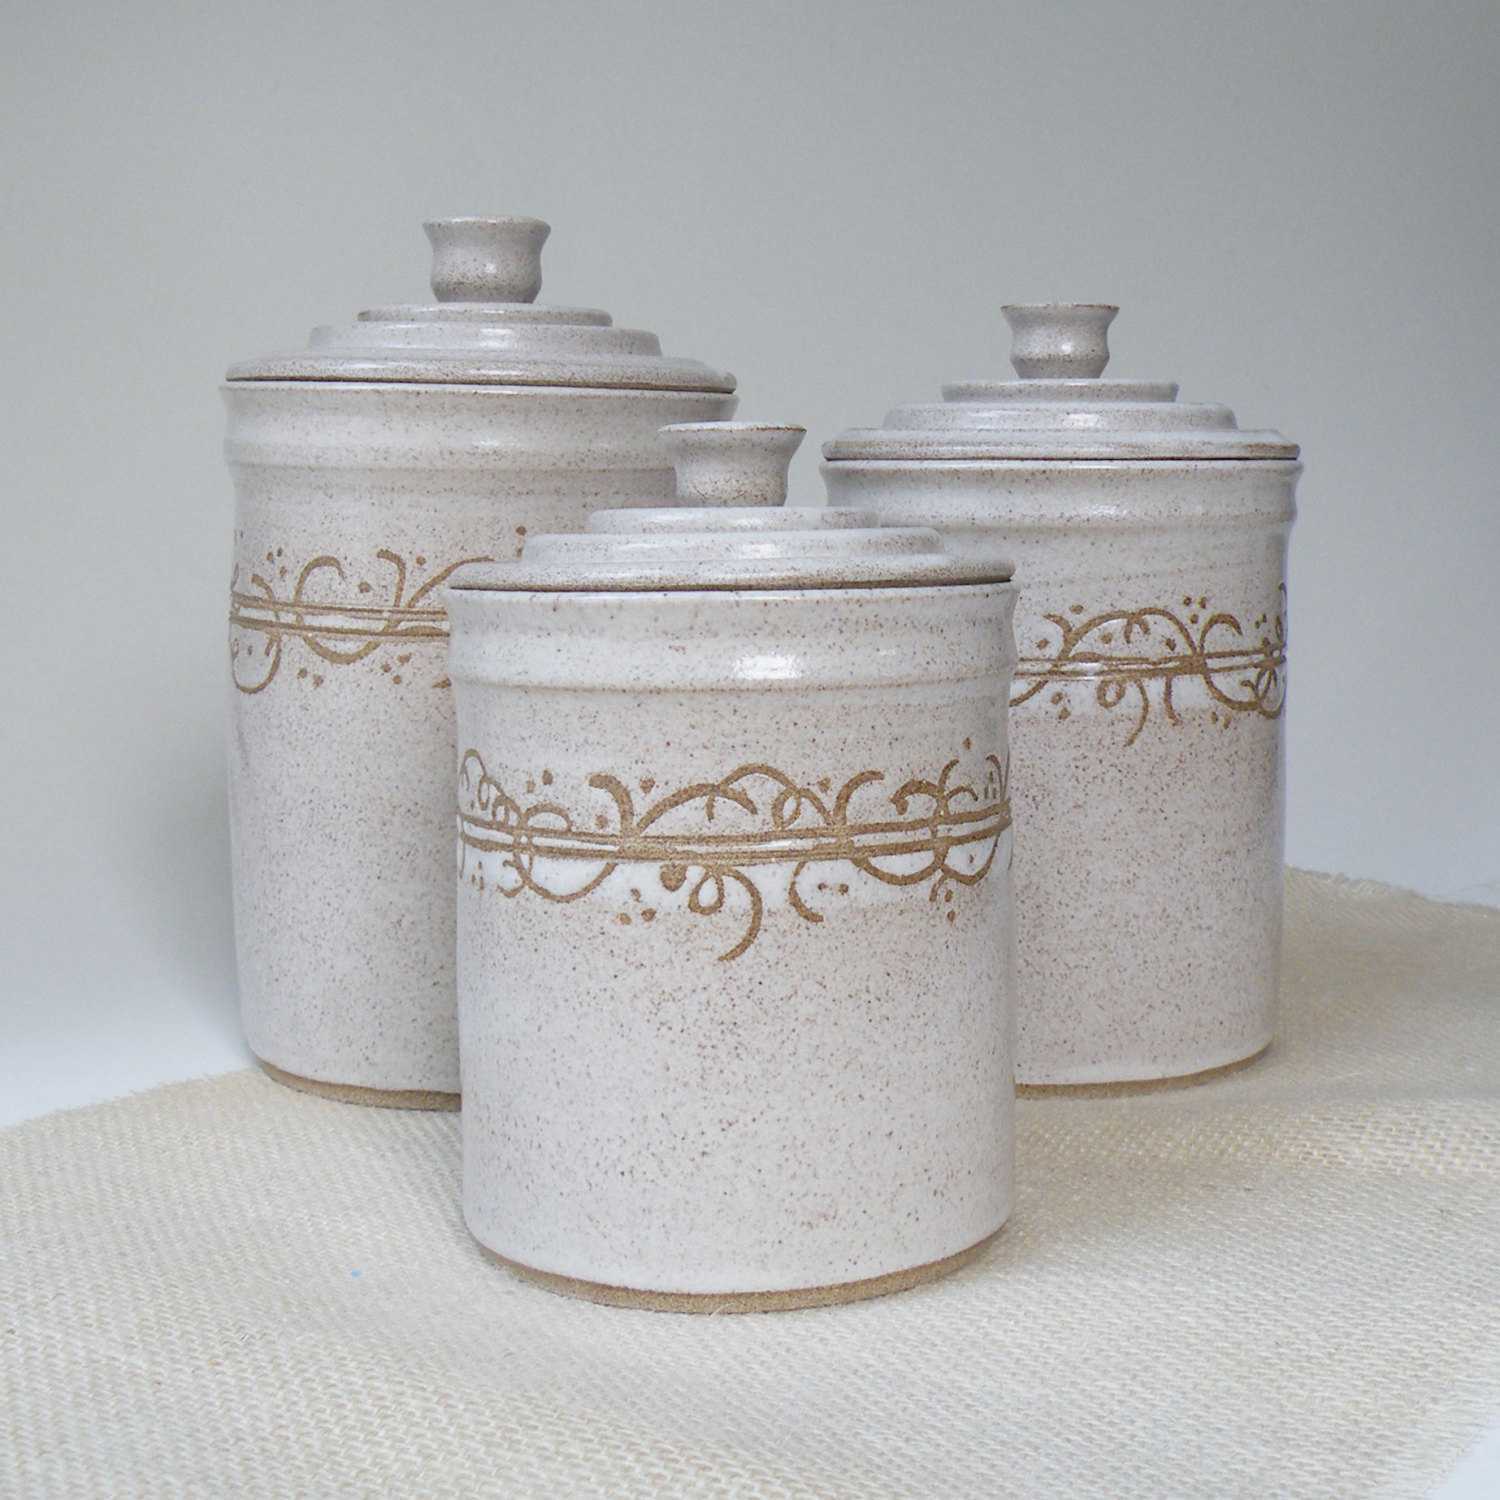 Fabulous White Ceramic Kitchen Canisters Trends And Tile Canister ...